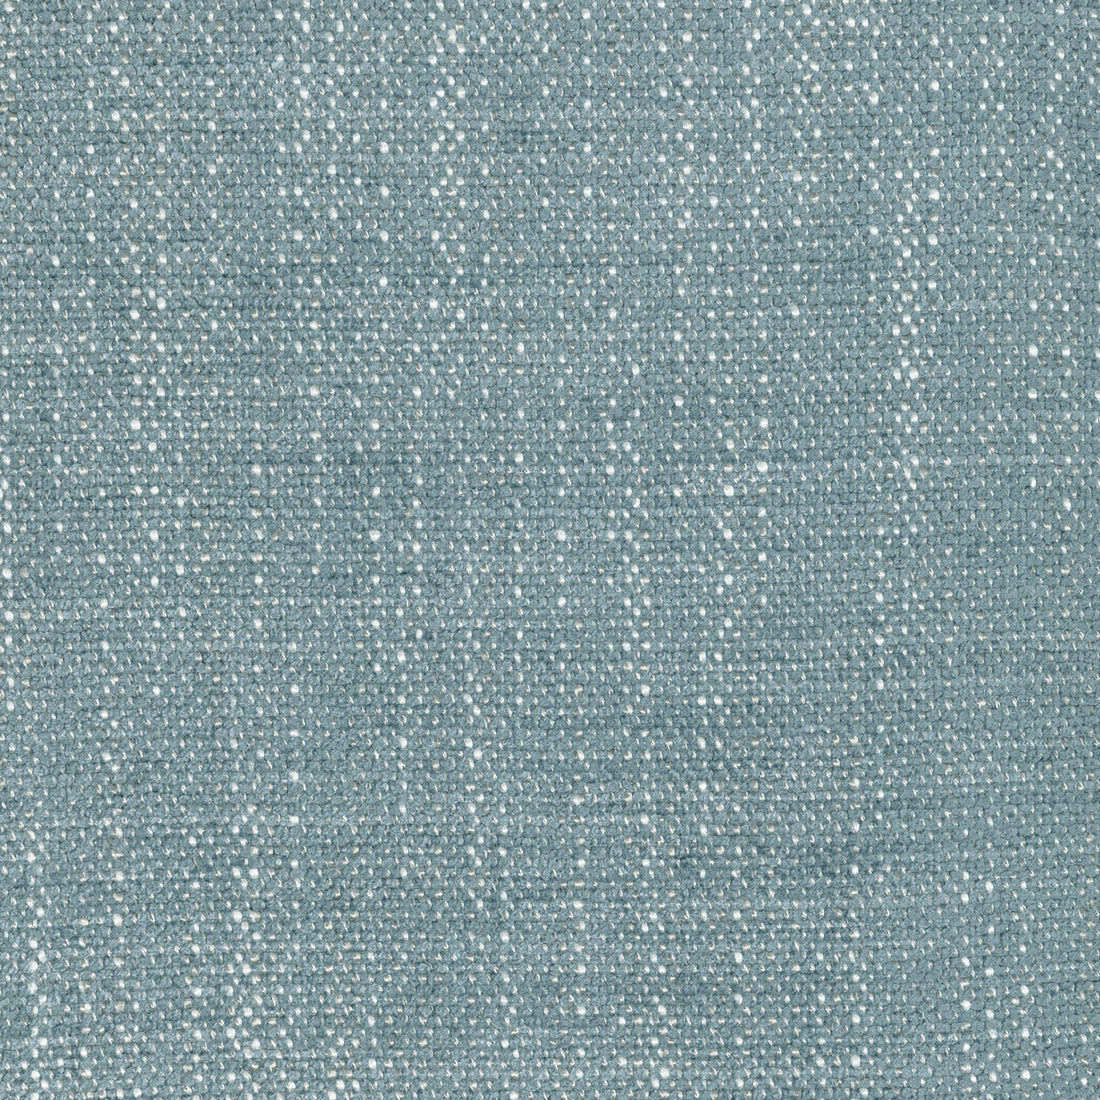 Kravet Couture fabric in 36597-15 color - pattern 36597.15.0 - by Kravet Couture in the Mabley Handler collection